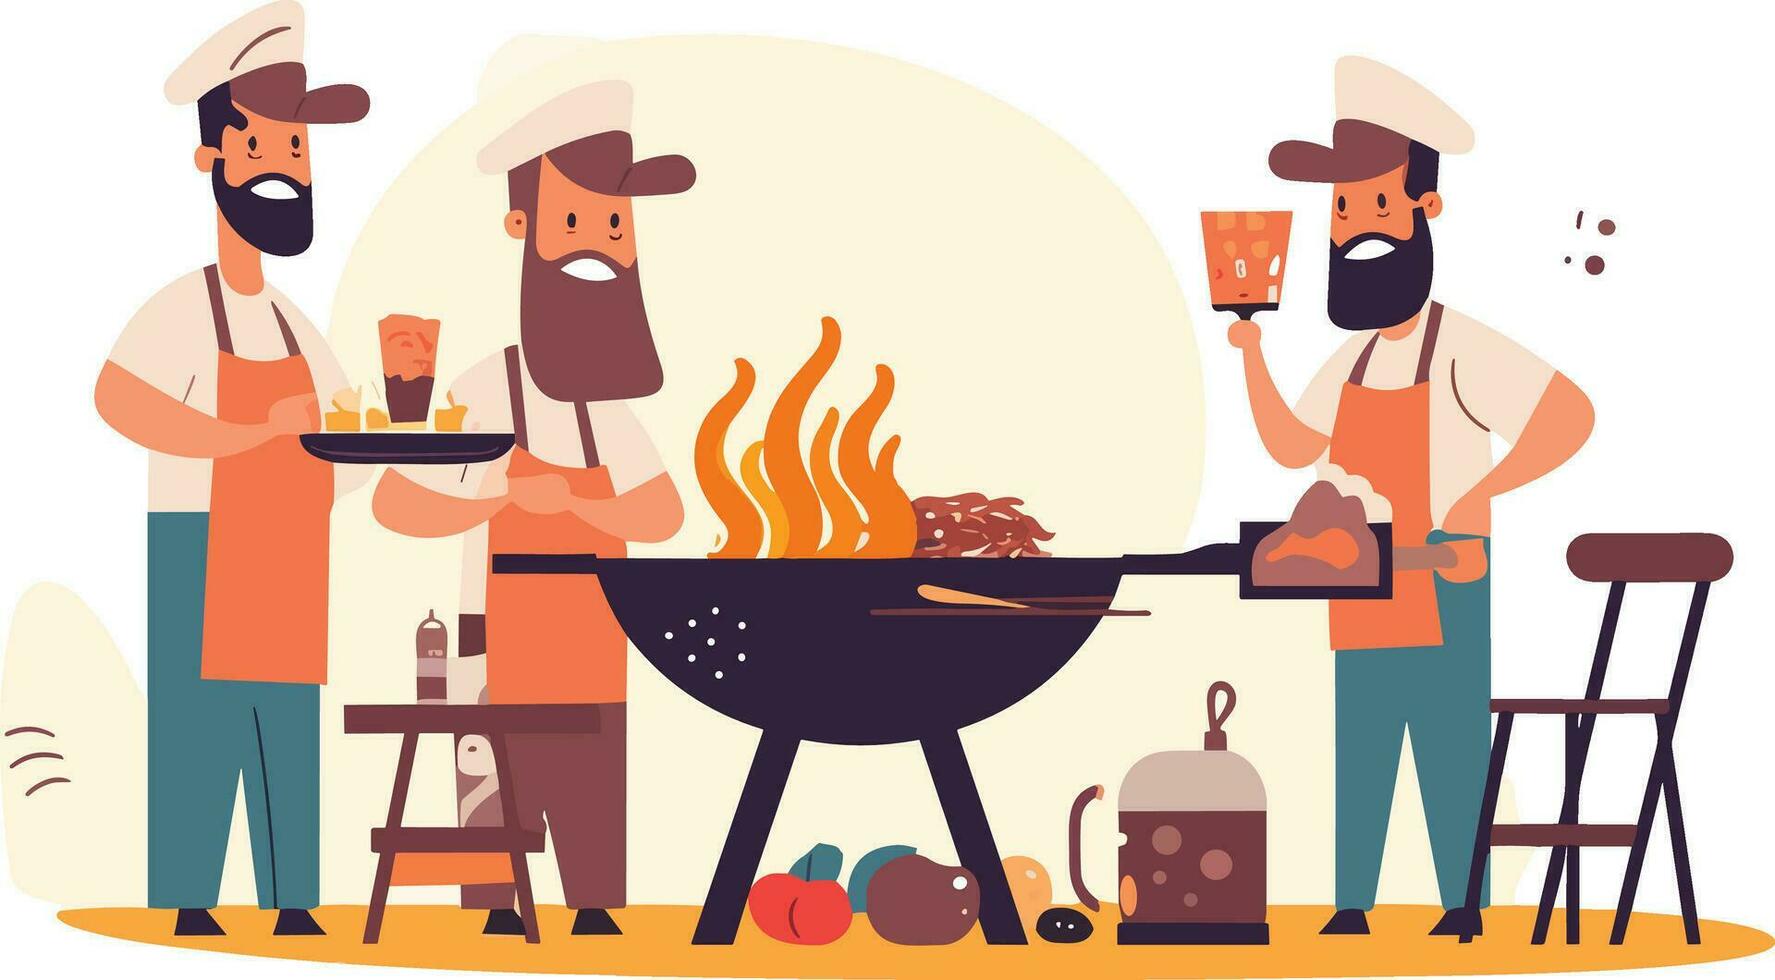 Gathering of Friends Enjoying Food and Drink with Laughter and Joy, friendship day, barbecue scene illustration vector